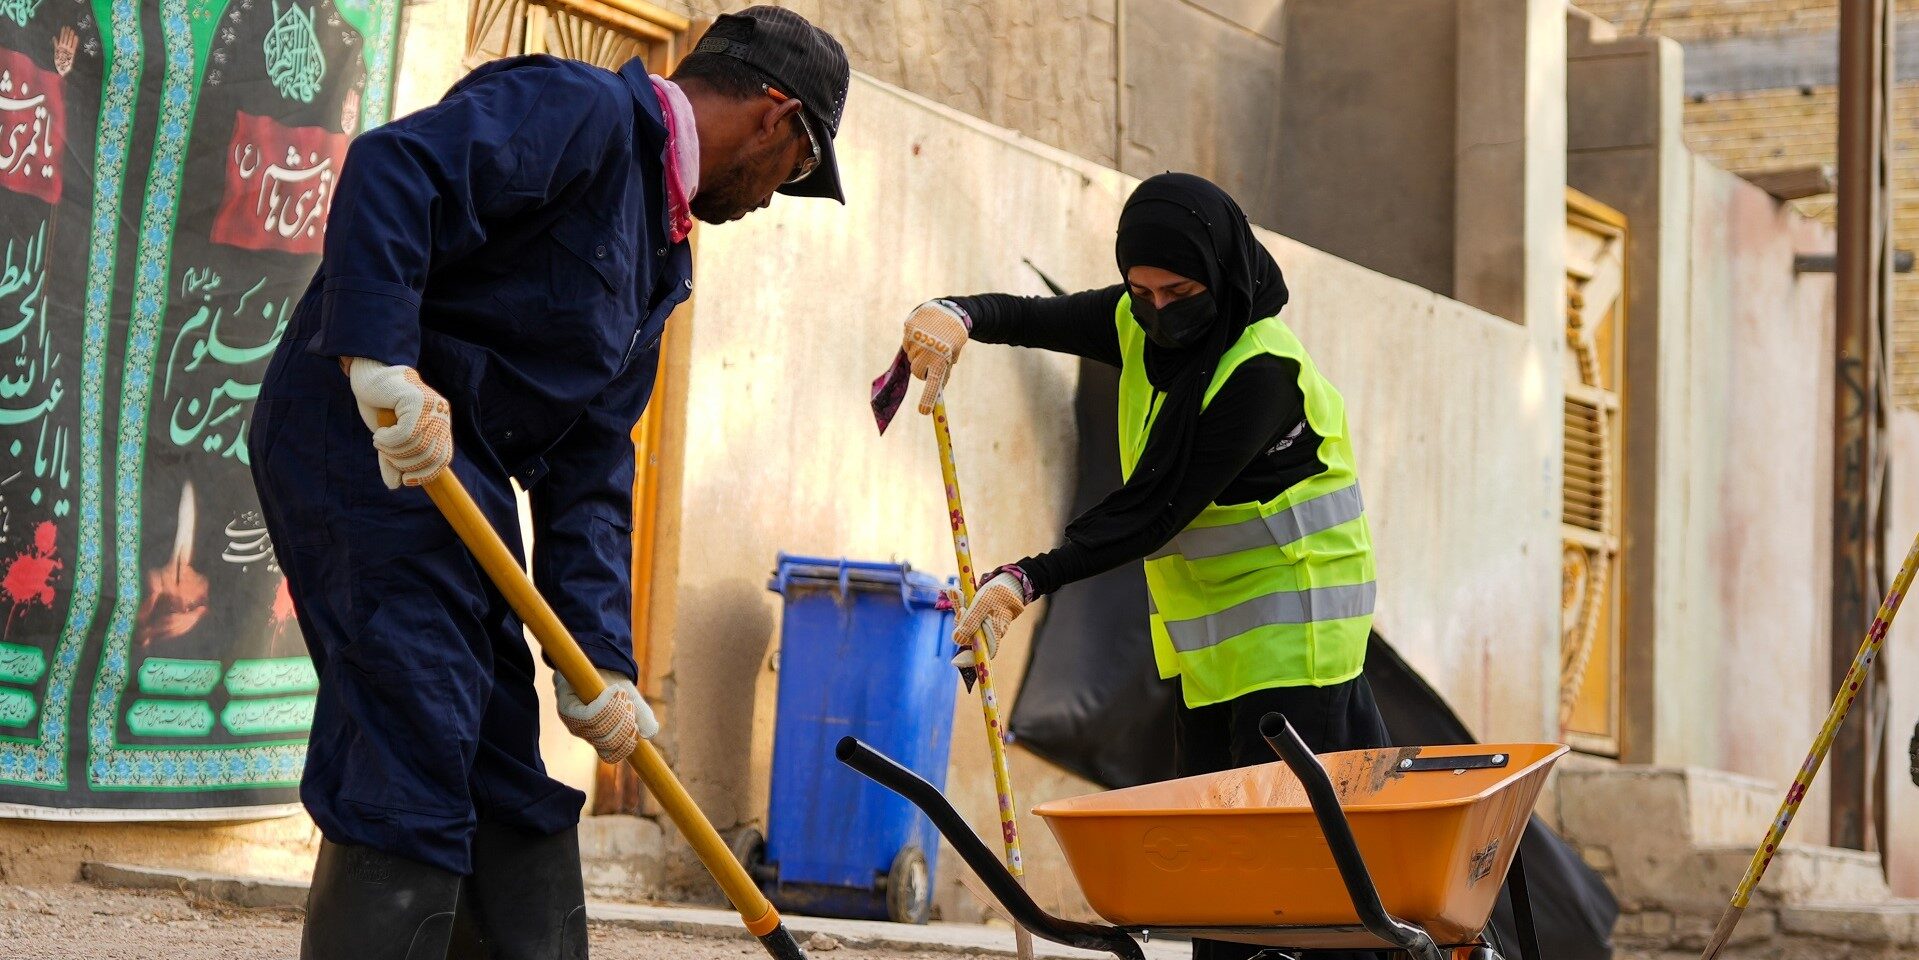 A woman participating in a cleanup campaign in a more conservative locality in Iraq.